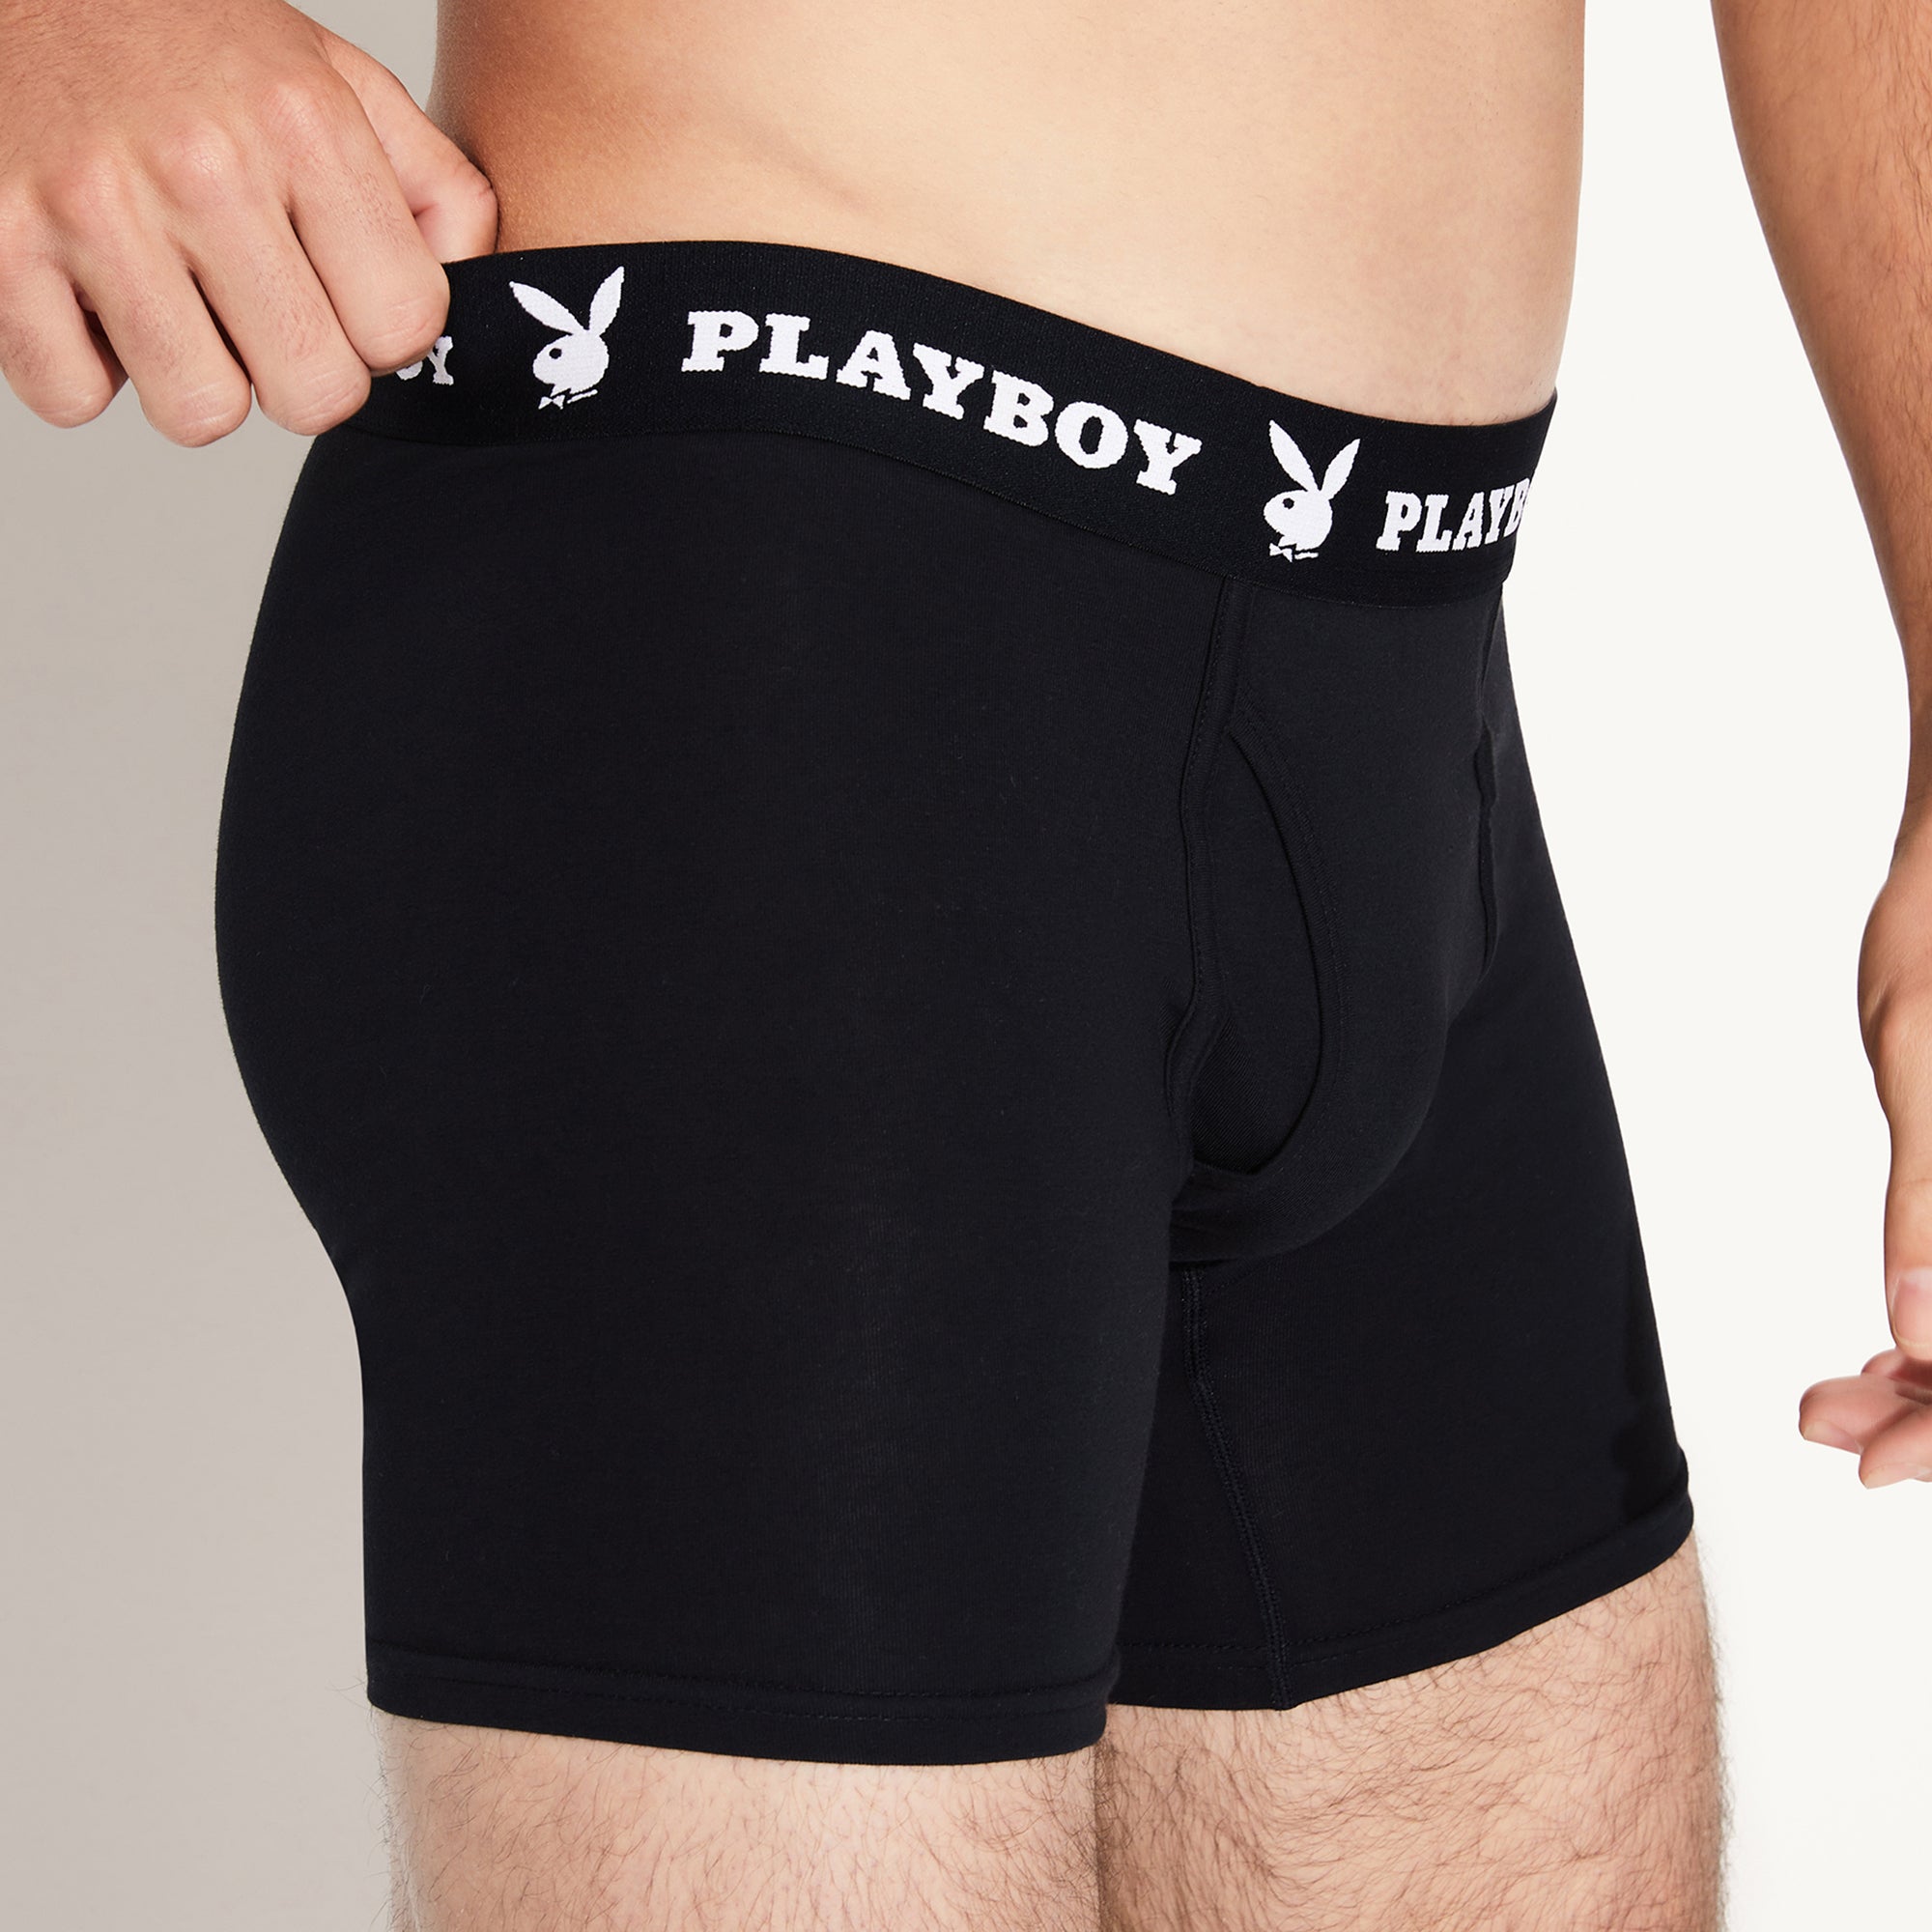 playboy underwear men, playboy underwear men Suppliers and